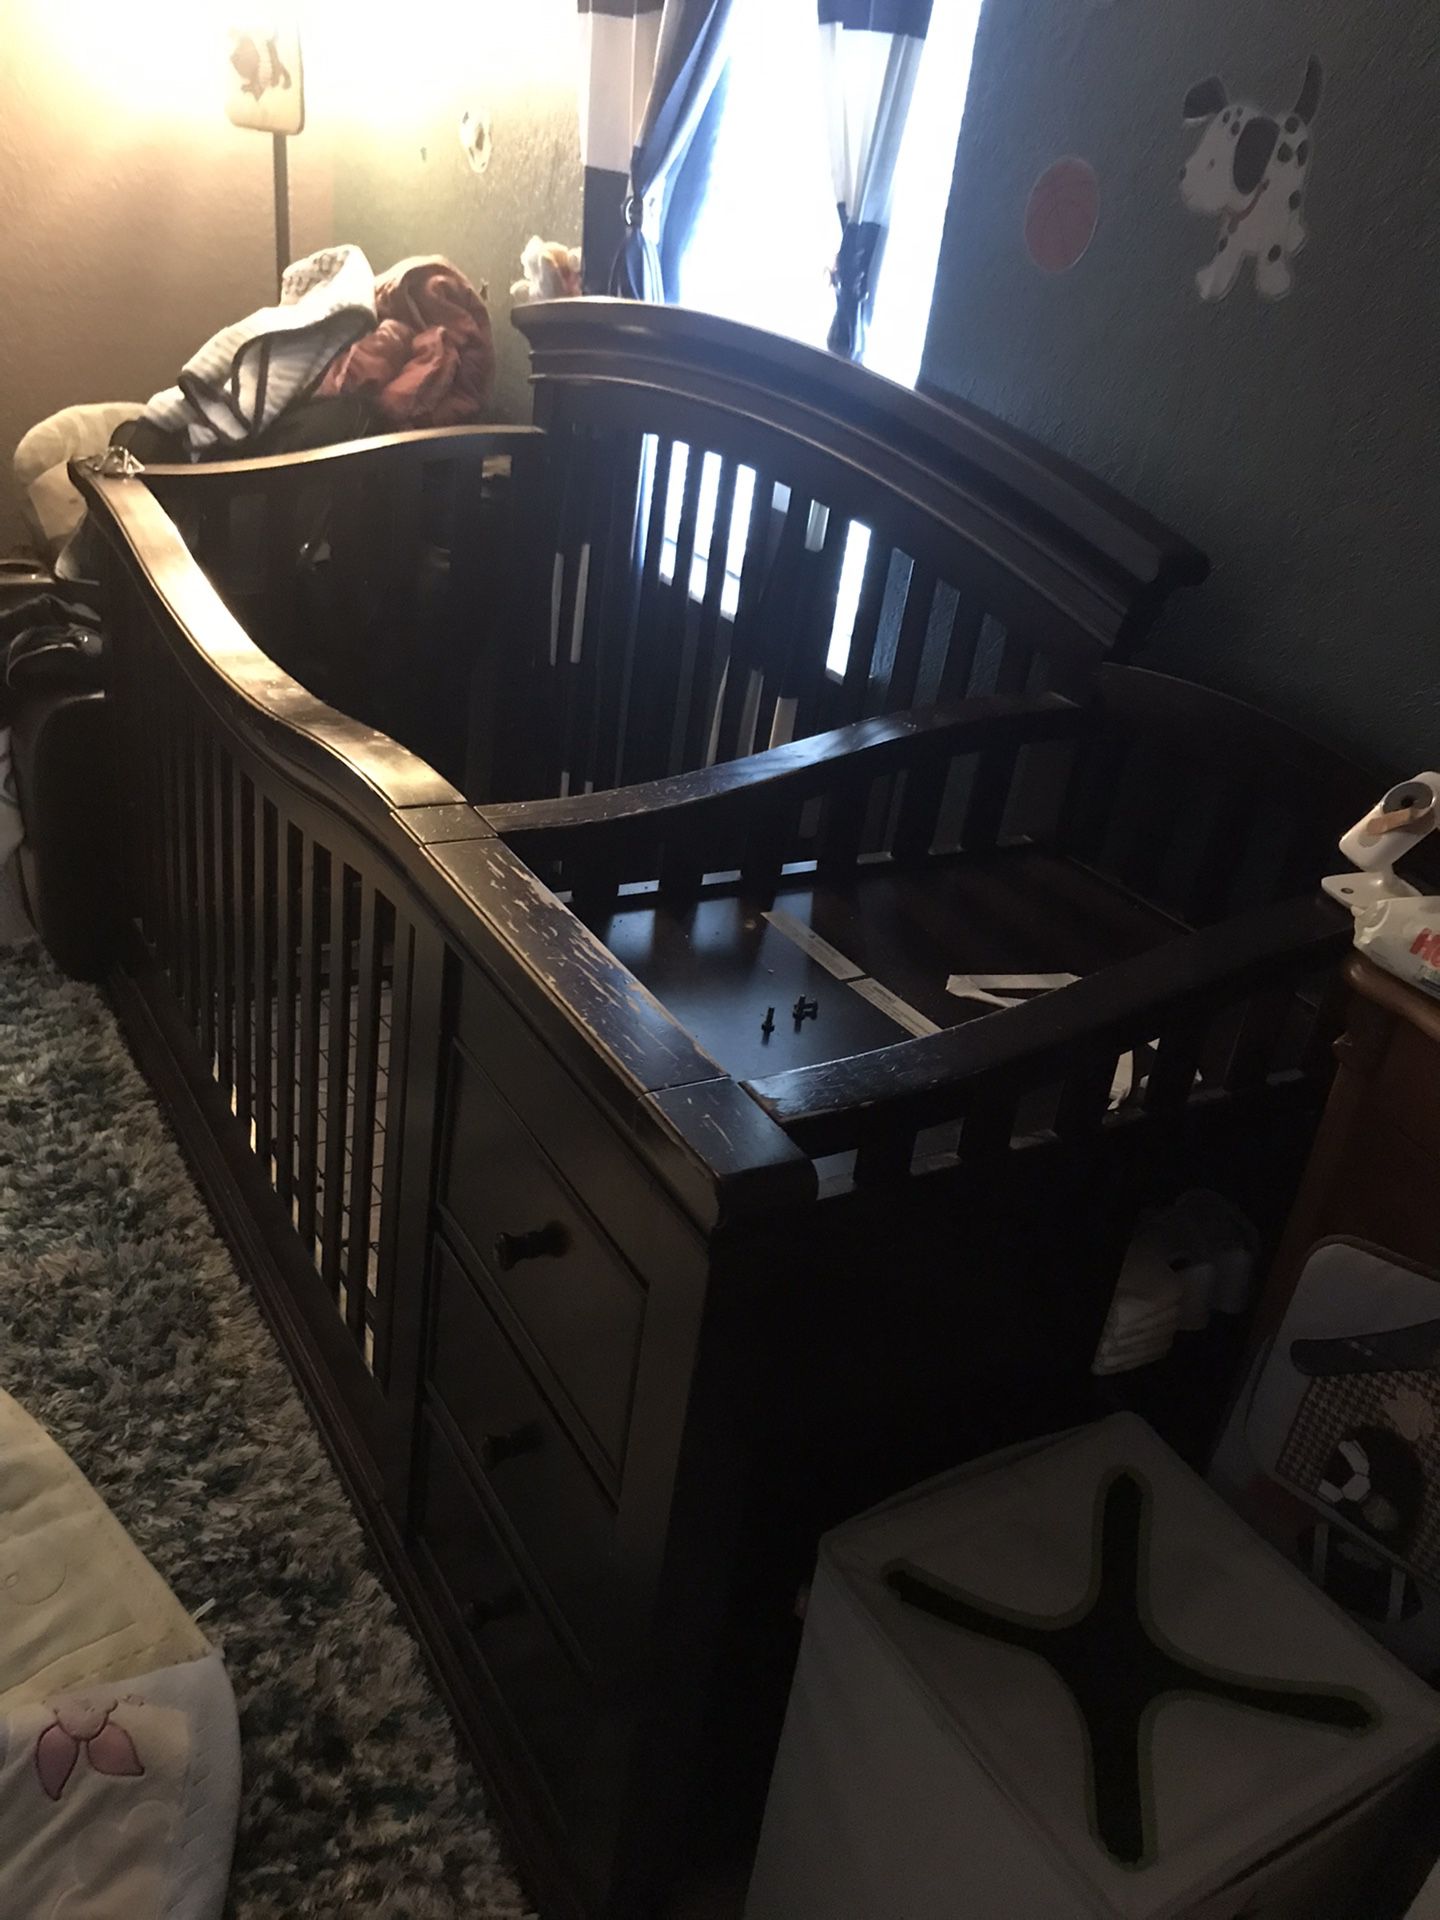 Baby Crib With Changer